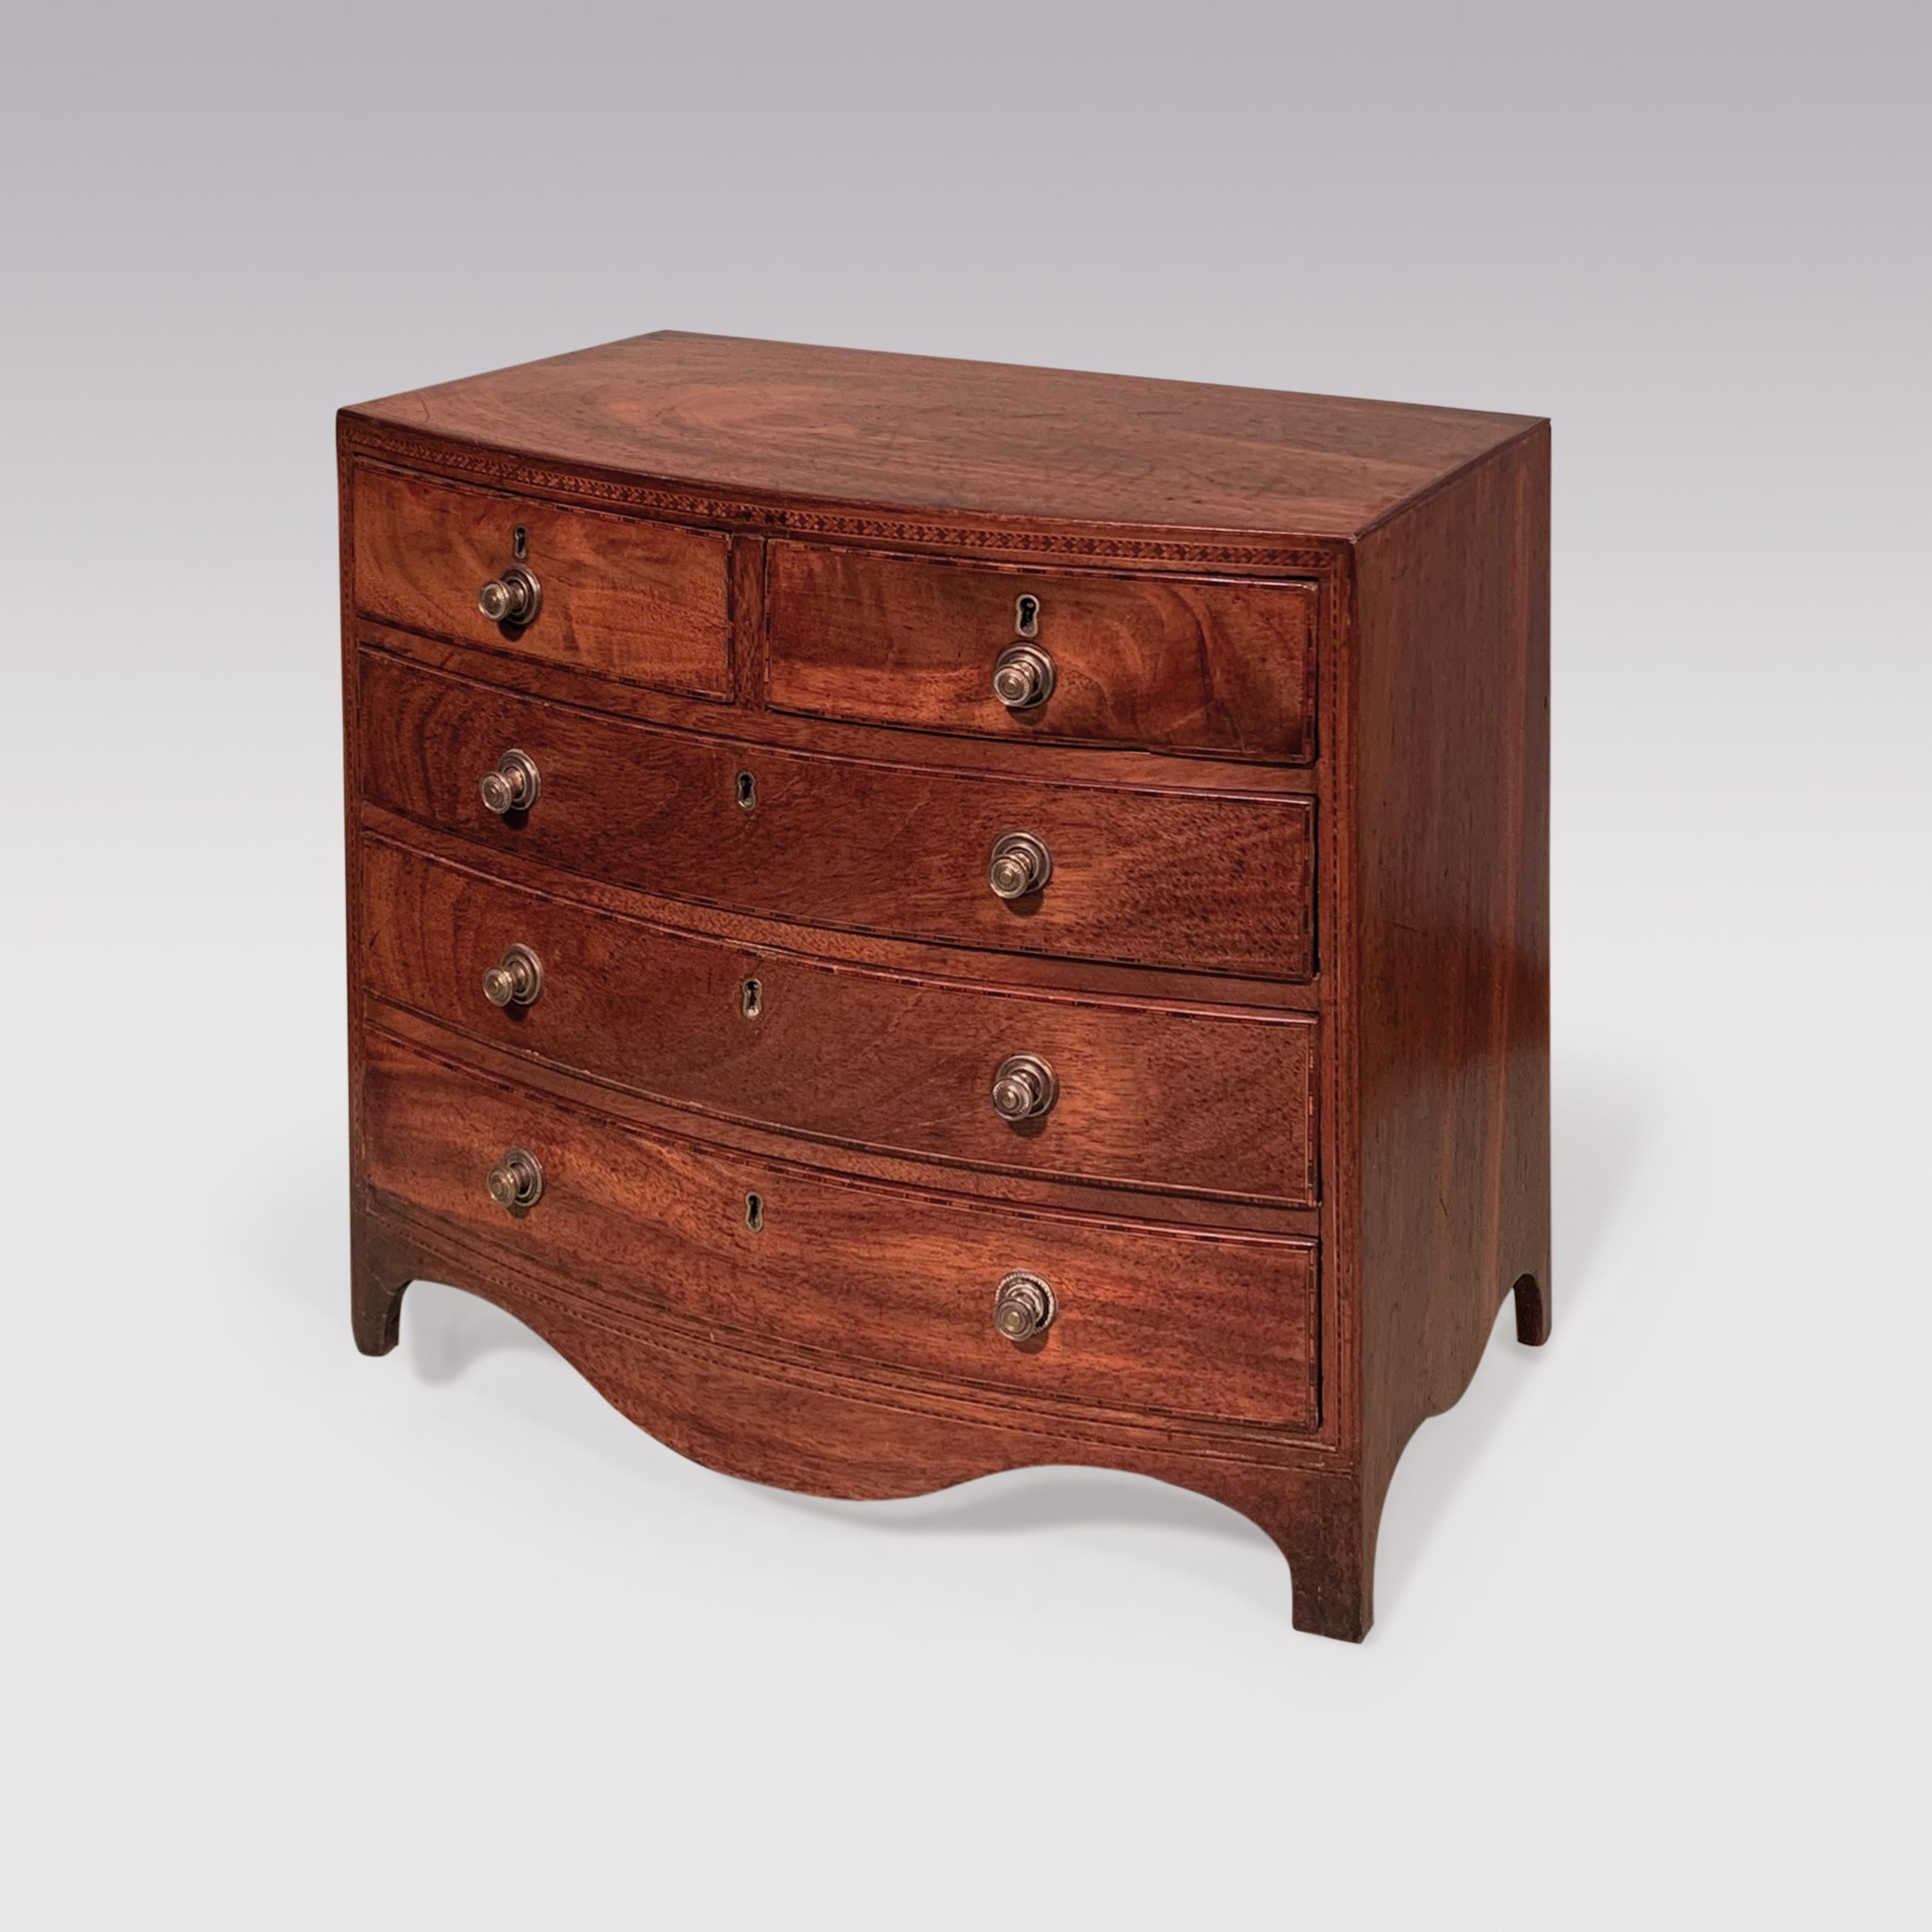 An early 19th century well-figured and faded mahogany miniature bowfront Chest of 2 short and 3 long graduated drawers. The Chest retaining original brass handles, with crosshatched inlay to the front, supported on bracket feet with shaped apron.